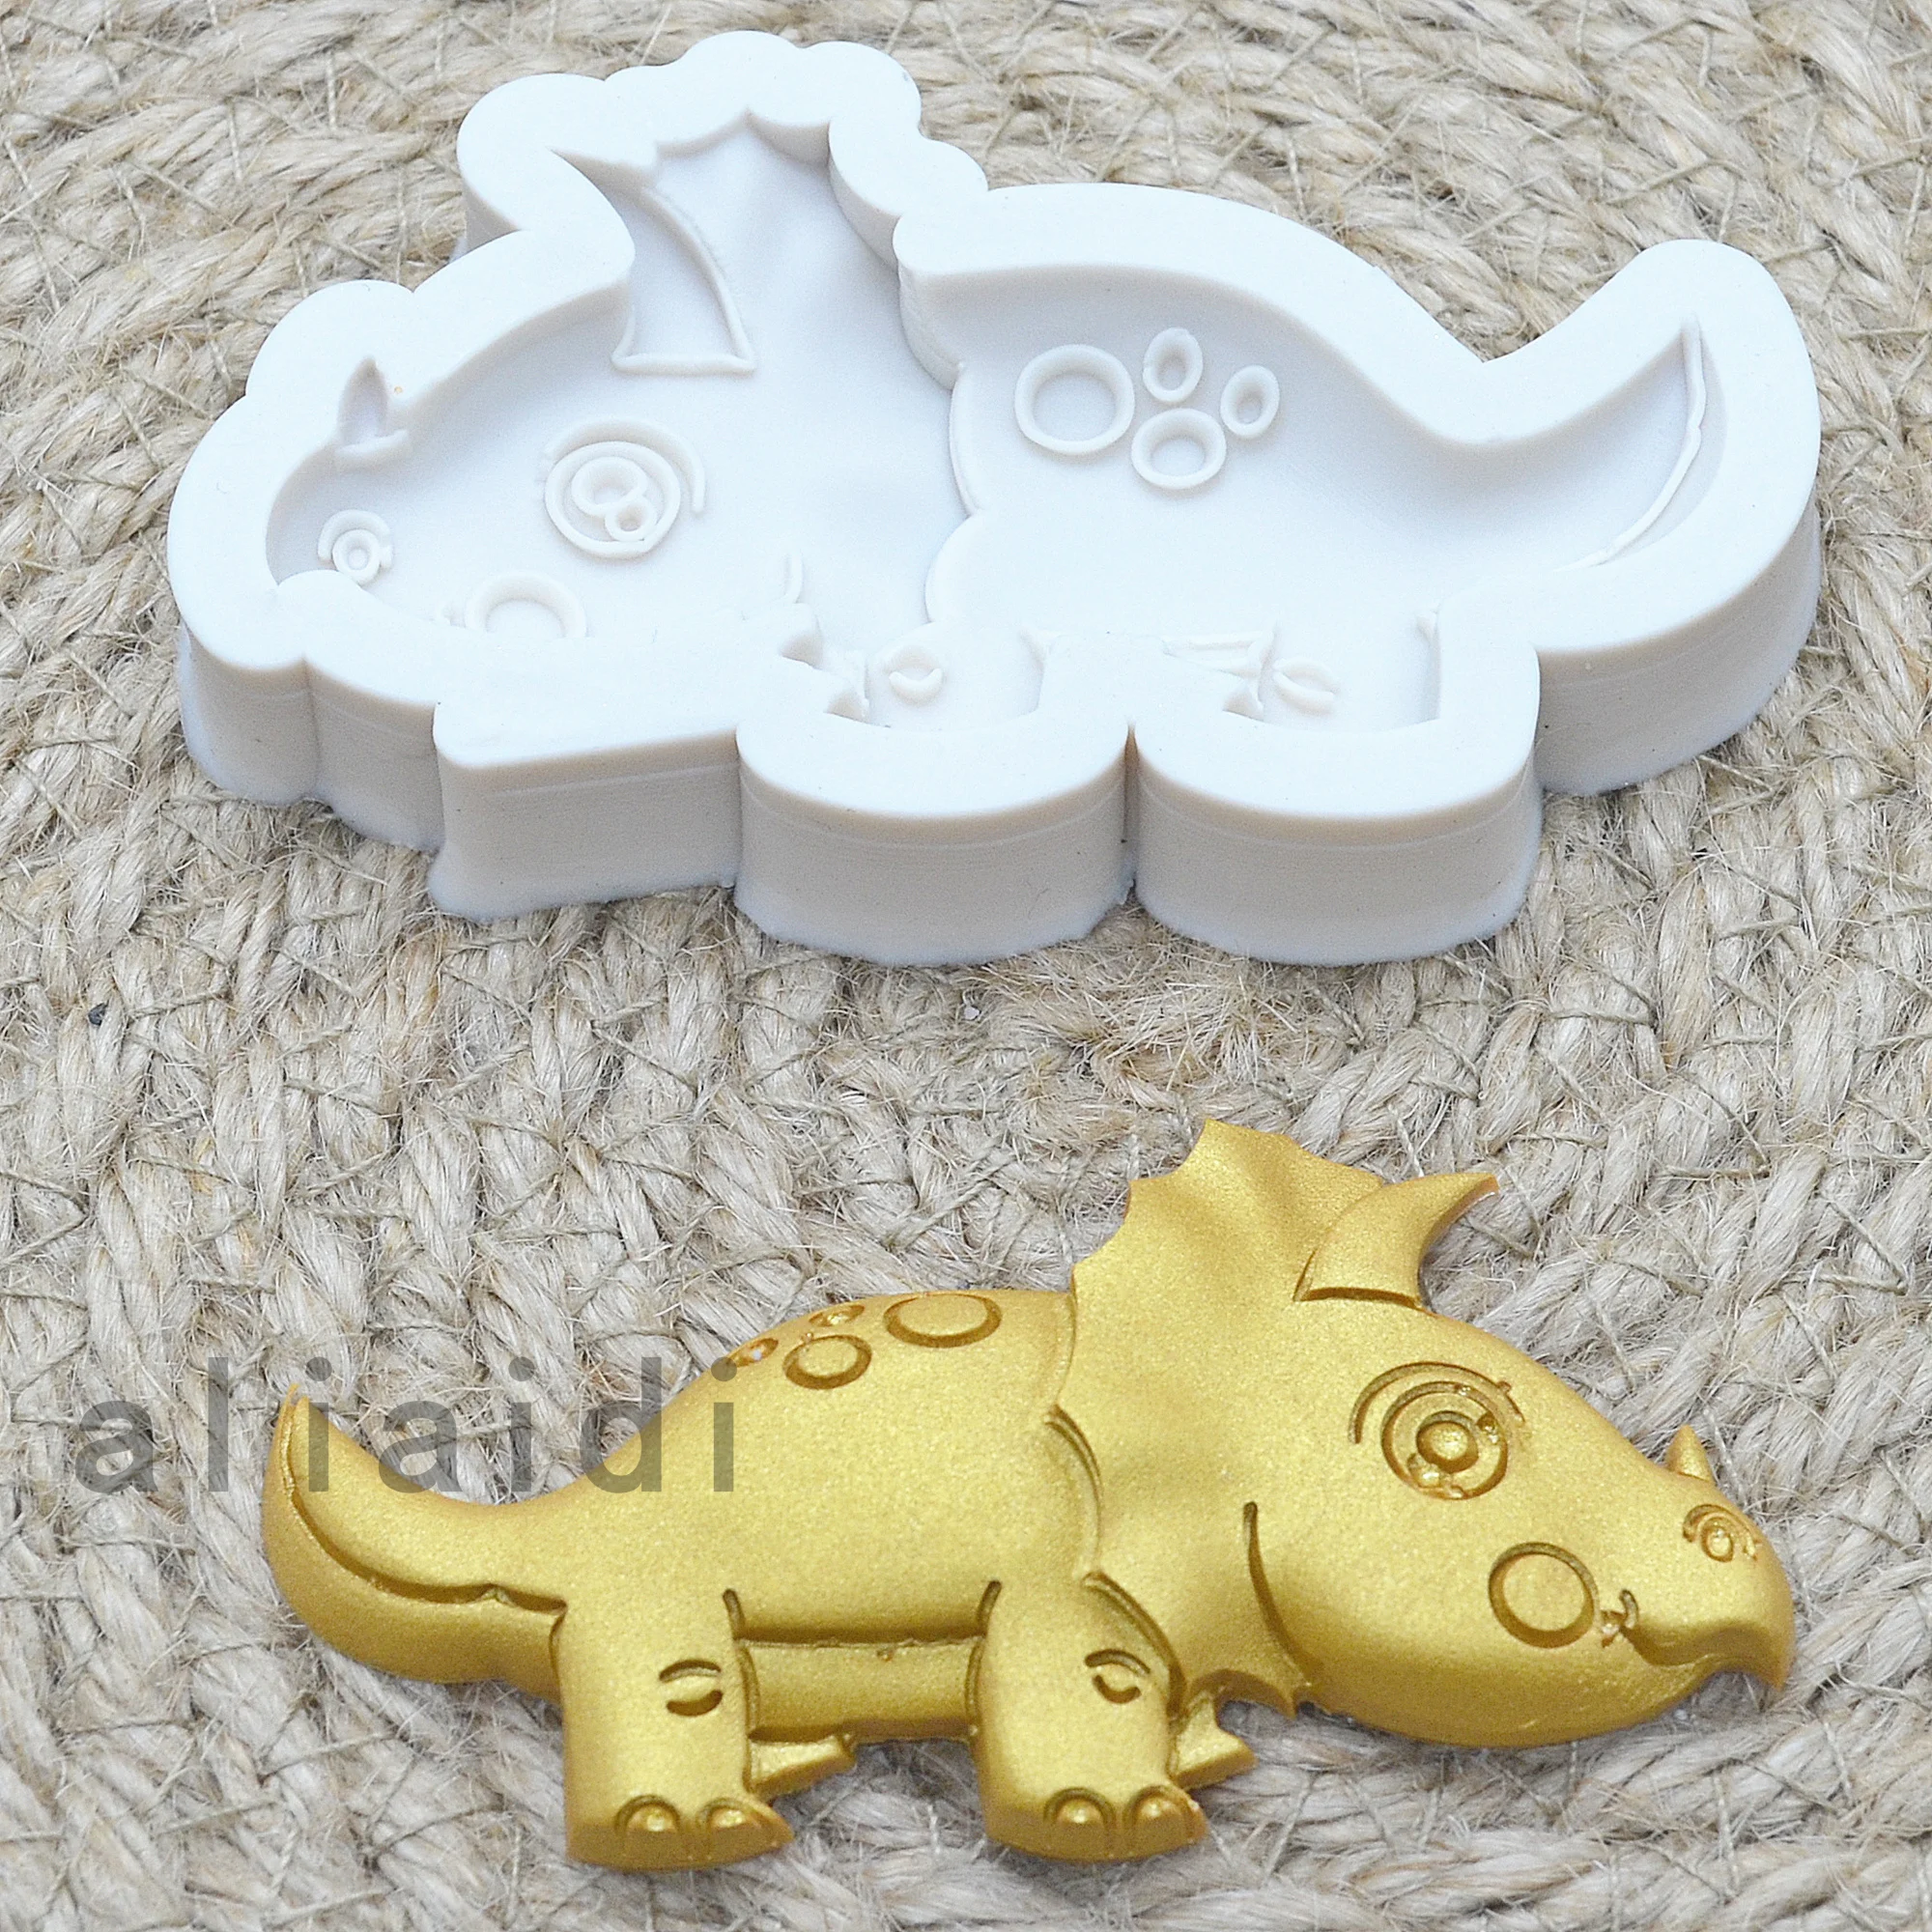 

Dinosaur Silicone Molds For Baking Fondant Cake Decorating Tools Chocolate Gumpaste Moulds Pastry Kitchen Baking Accessories X21